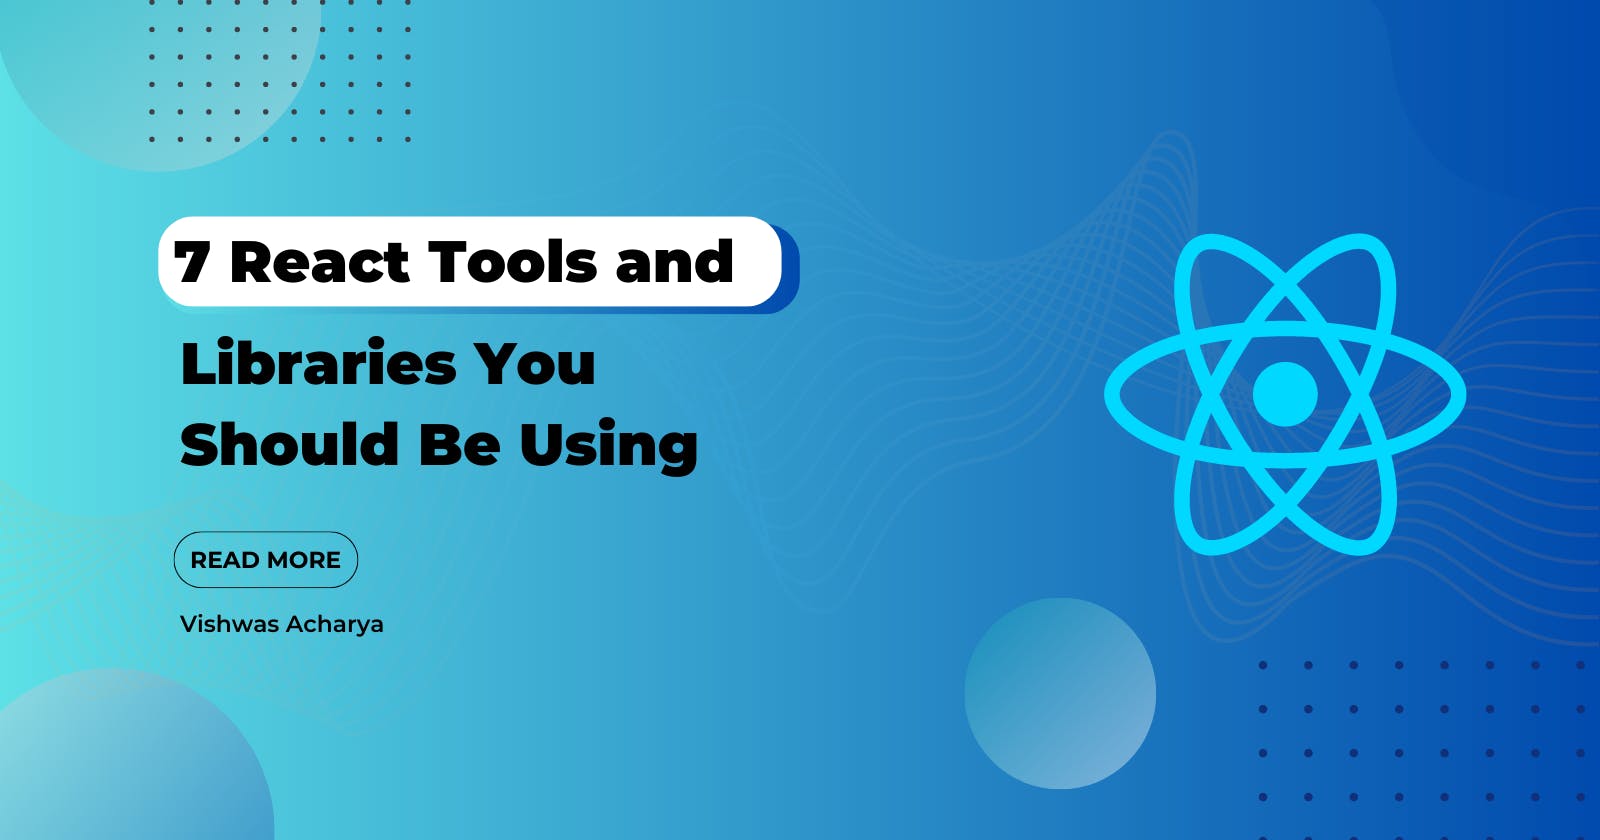 7 React Tools and Libraries You Should Be Using